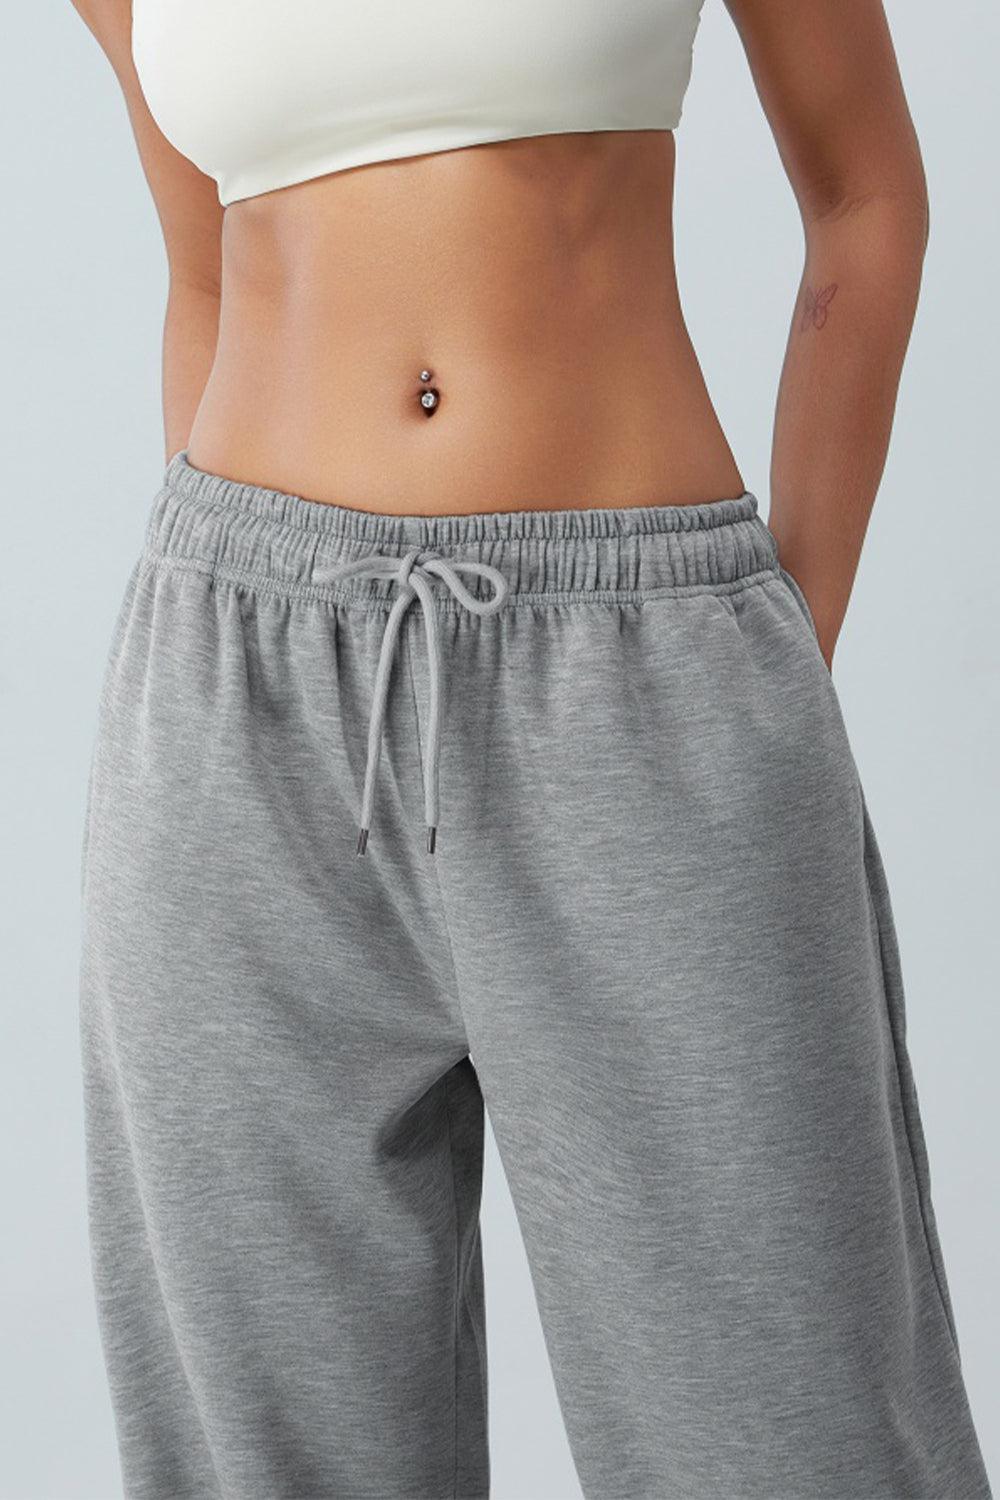 a woman in grey sweat pants and a white top